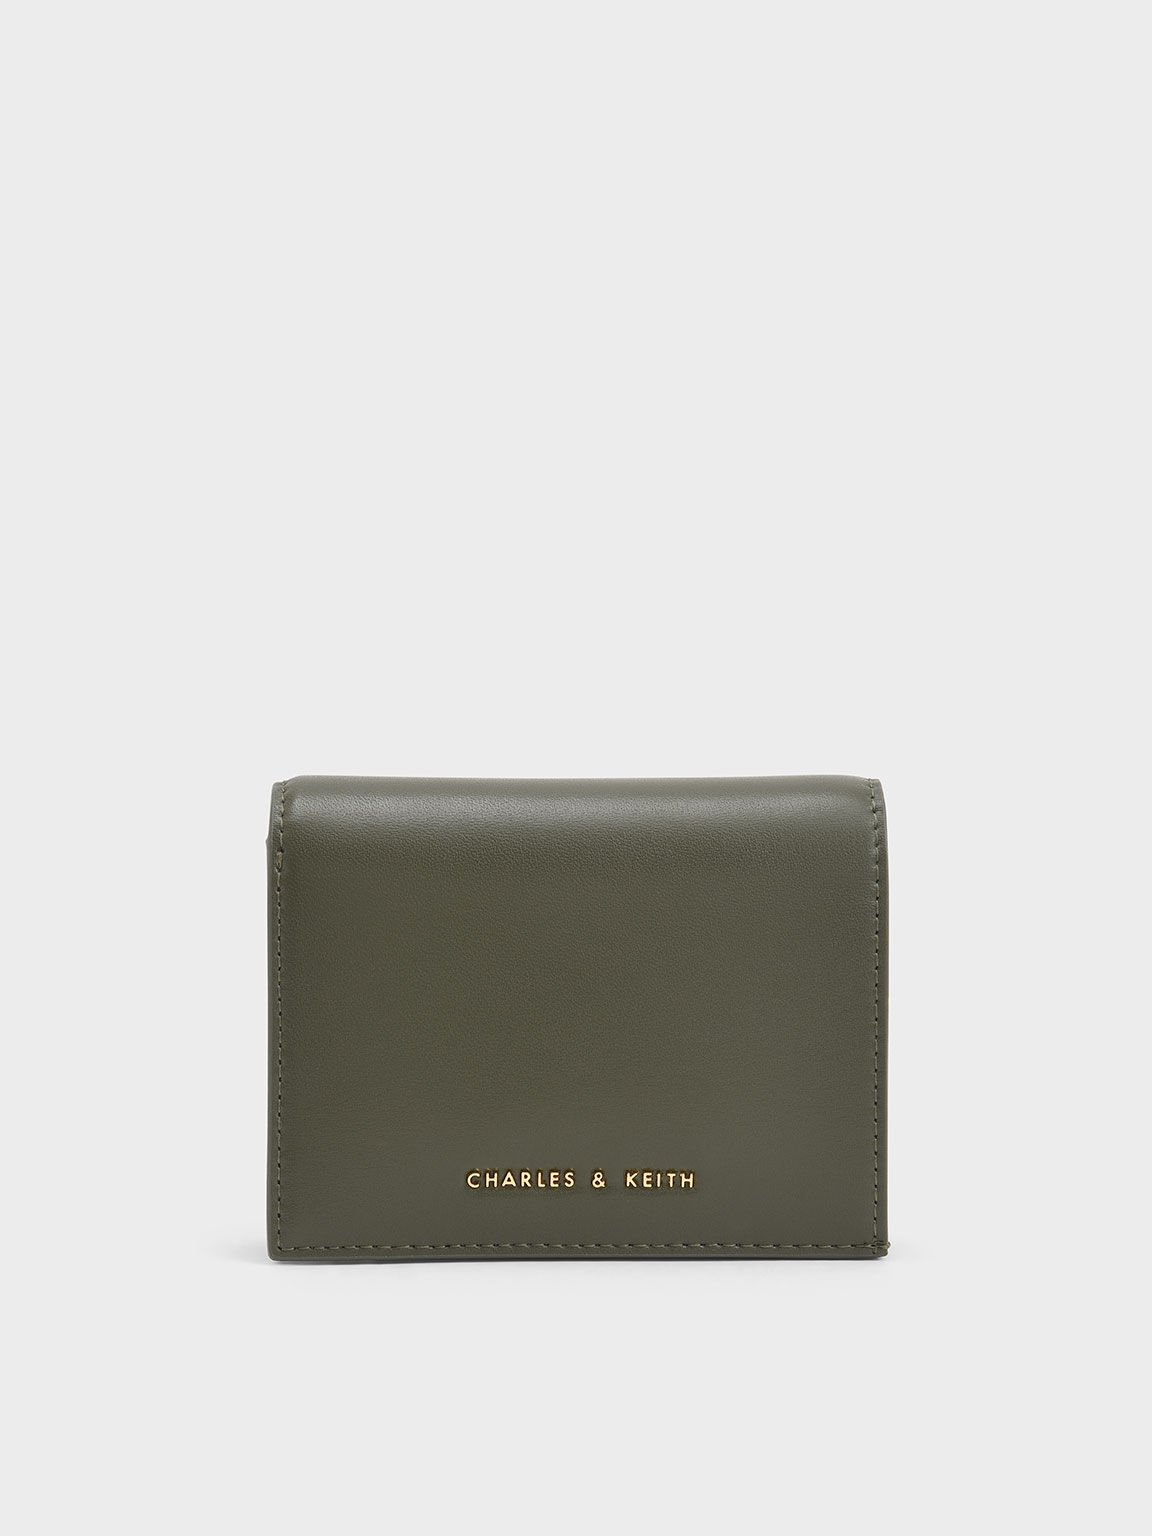 Charles & Keith Women's Snap Button Mini Short Wallet